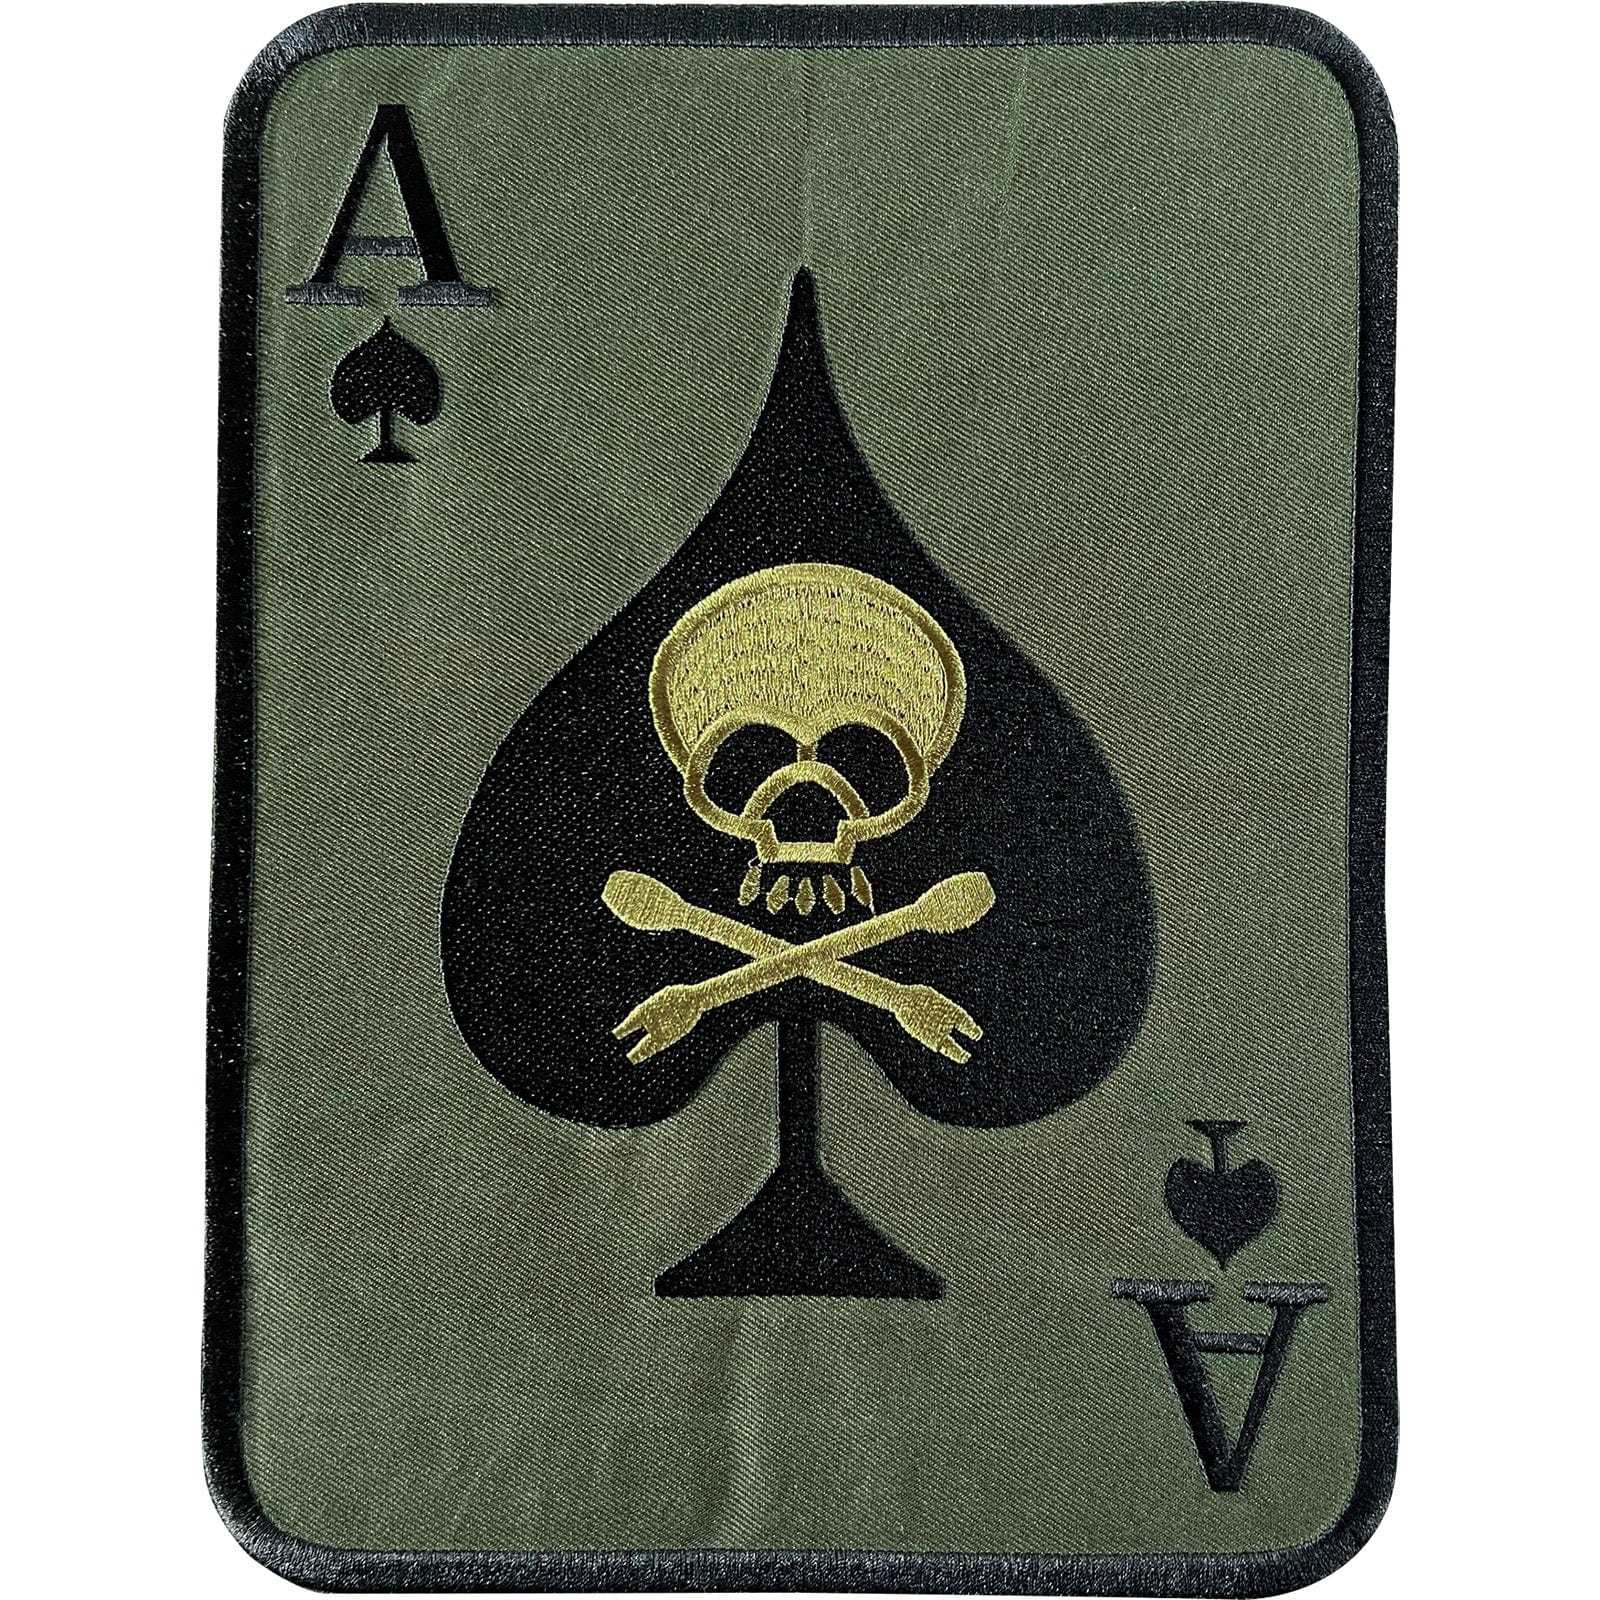 Big Large Ace of Spades Skull Playing Card Embroidery Patch Iron Sew On Clothes